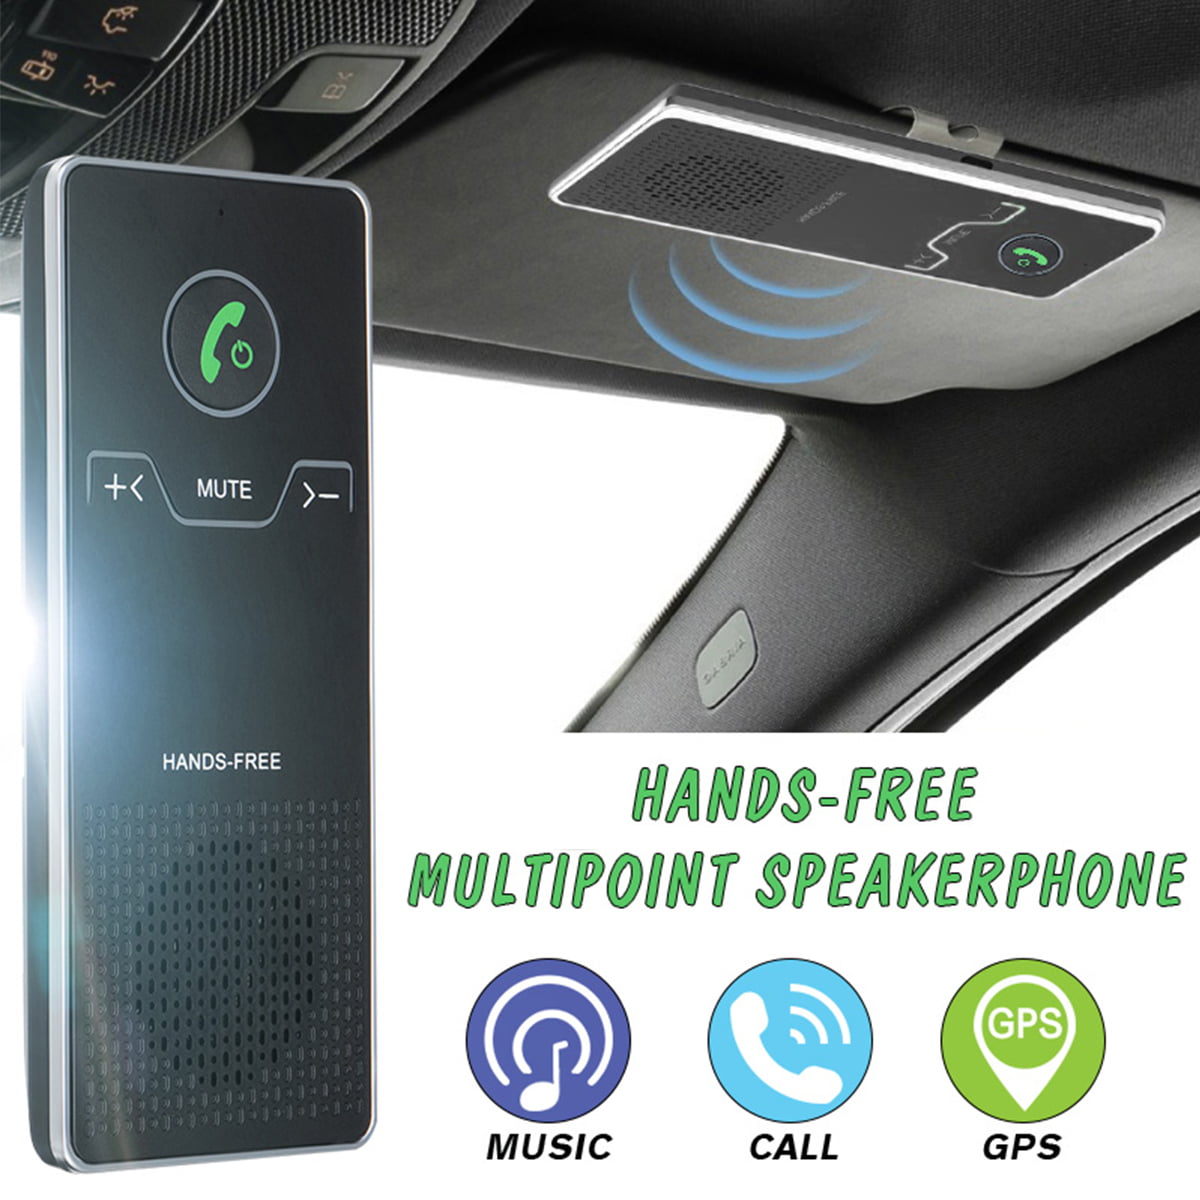 Car Wireless h Handsfree Speakerphone Multipoint Speakerphone Kit Car Sun Visor Hands-free Phone Audio Music Receiver Devices + Car + USB Cable